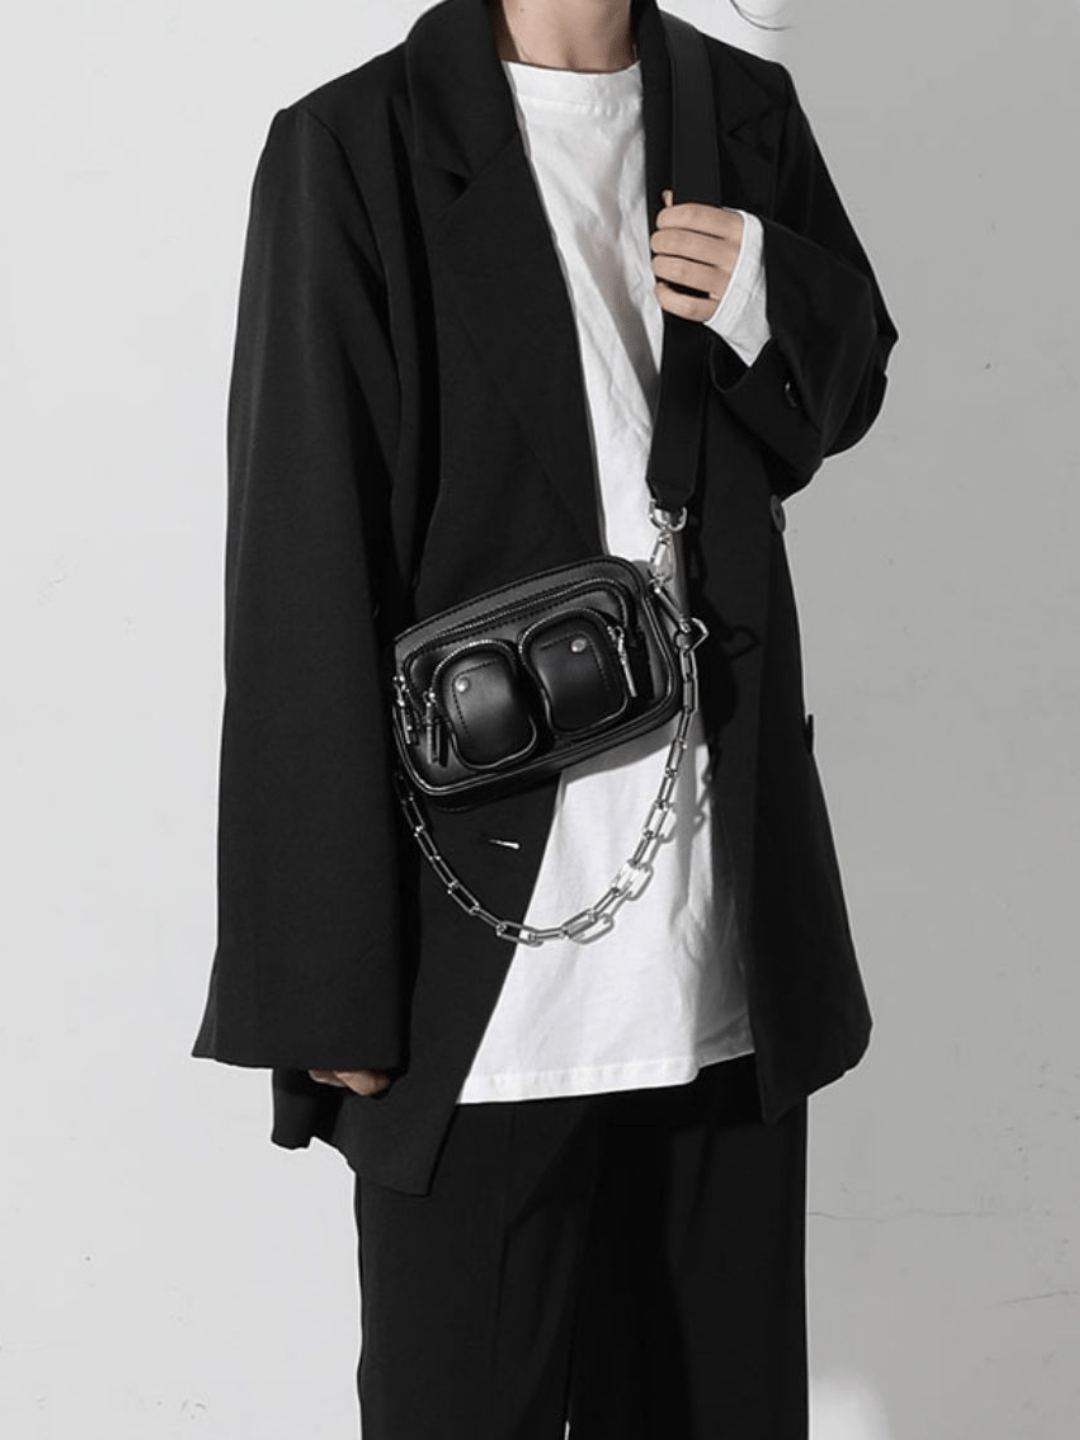 [luckystudio] crossbody small square cell phone bag na945